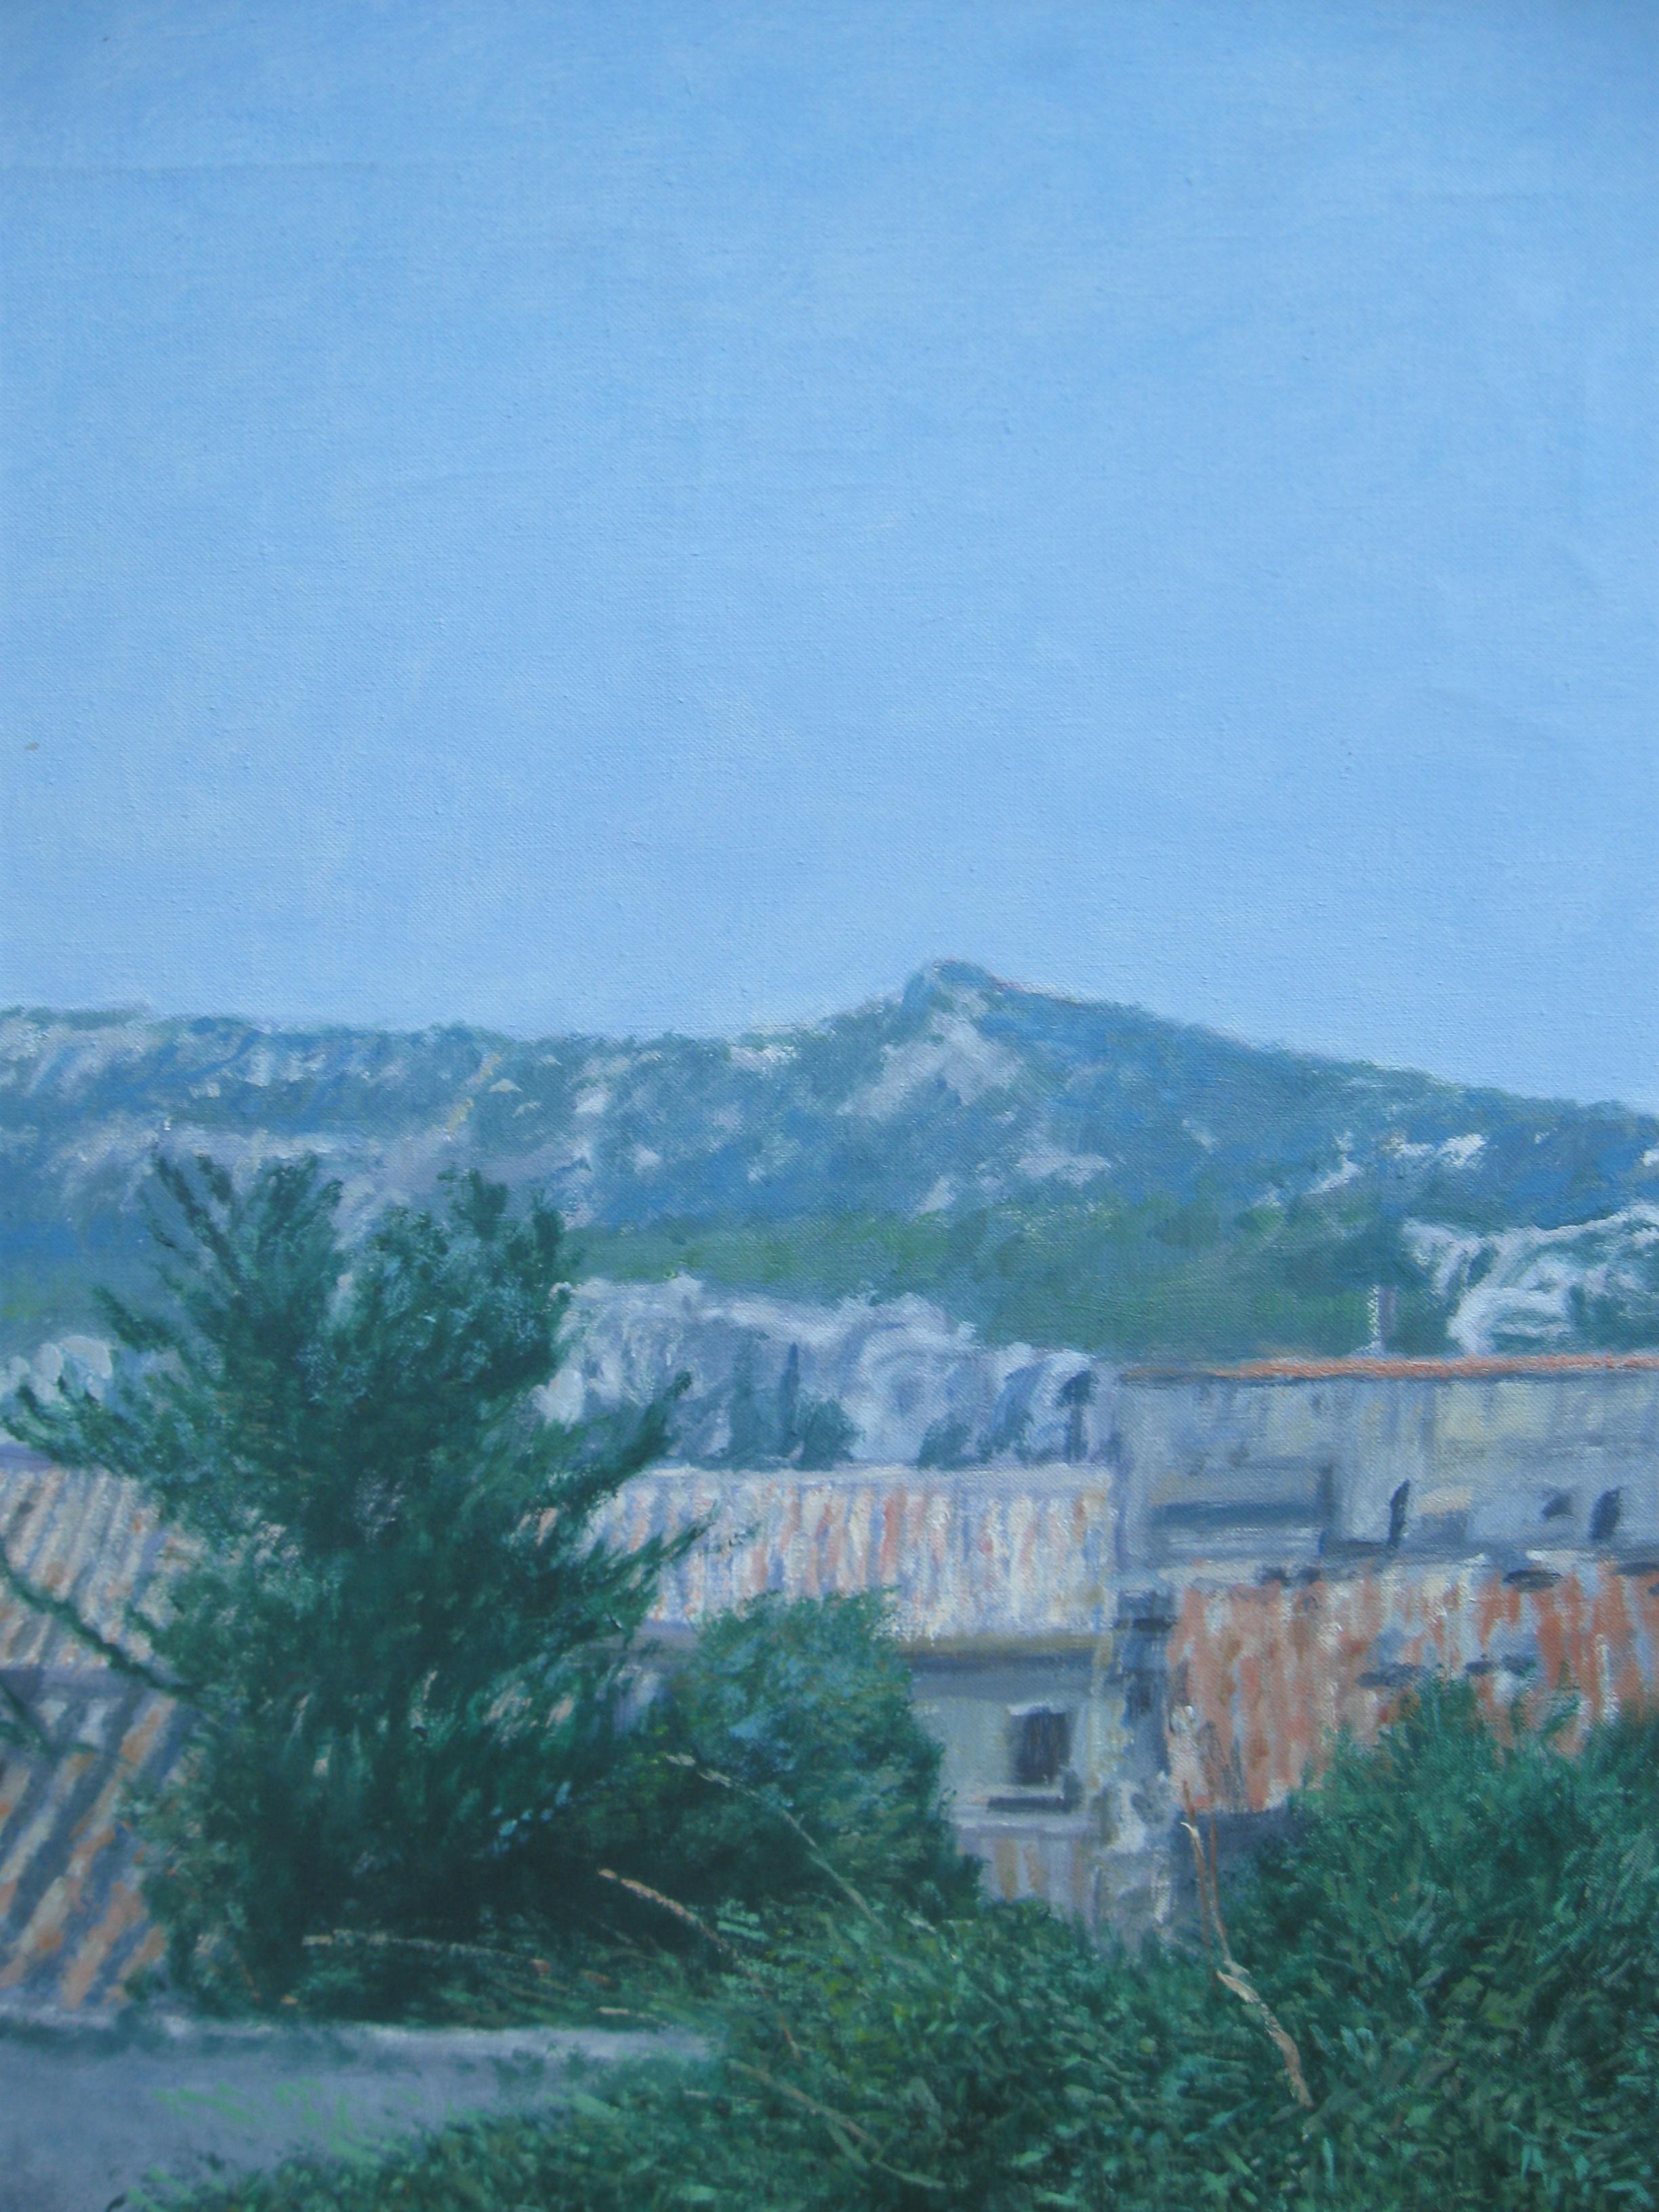 A fine oil by Modern British artist Christopher Sanders R.A. (1905-1991).
painting : 52cmx61cm
Good quality modern frame: 63cmx73cm
The painting is a view of Le Baux de Provence, France.
Superb impressionist technique capturing the warmth of the